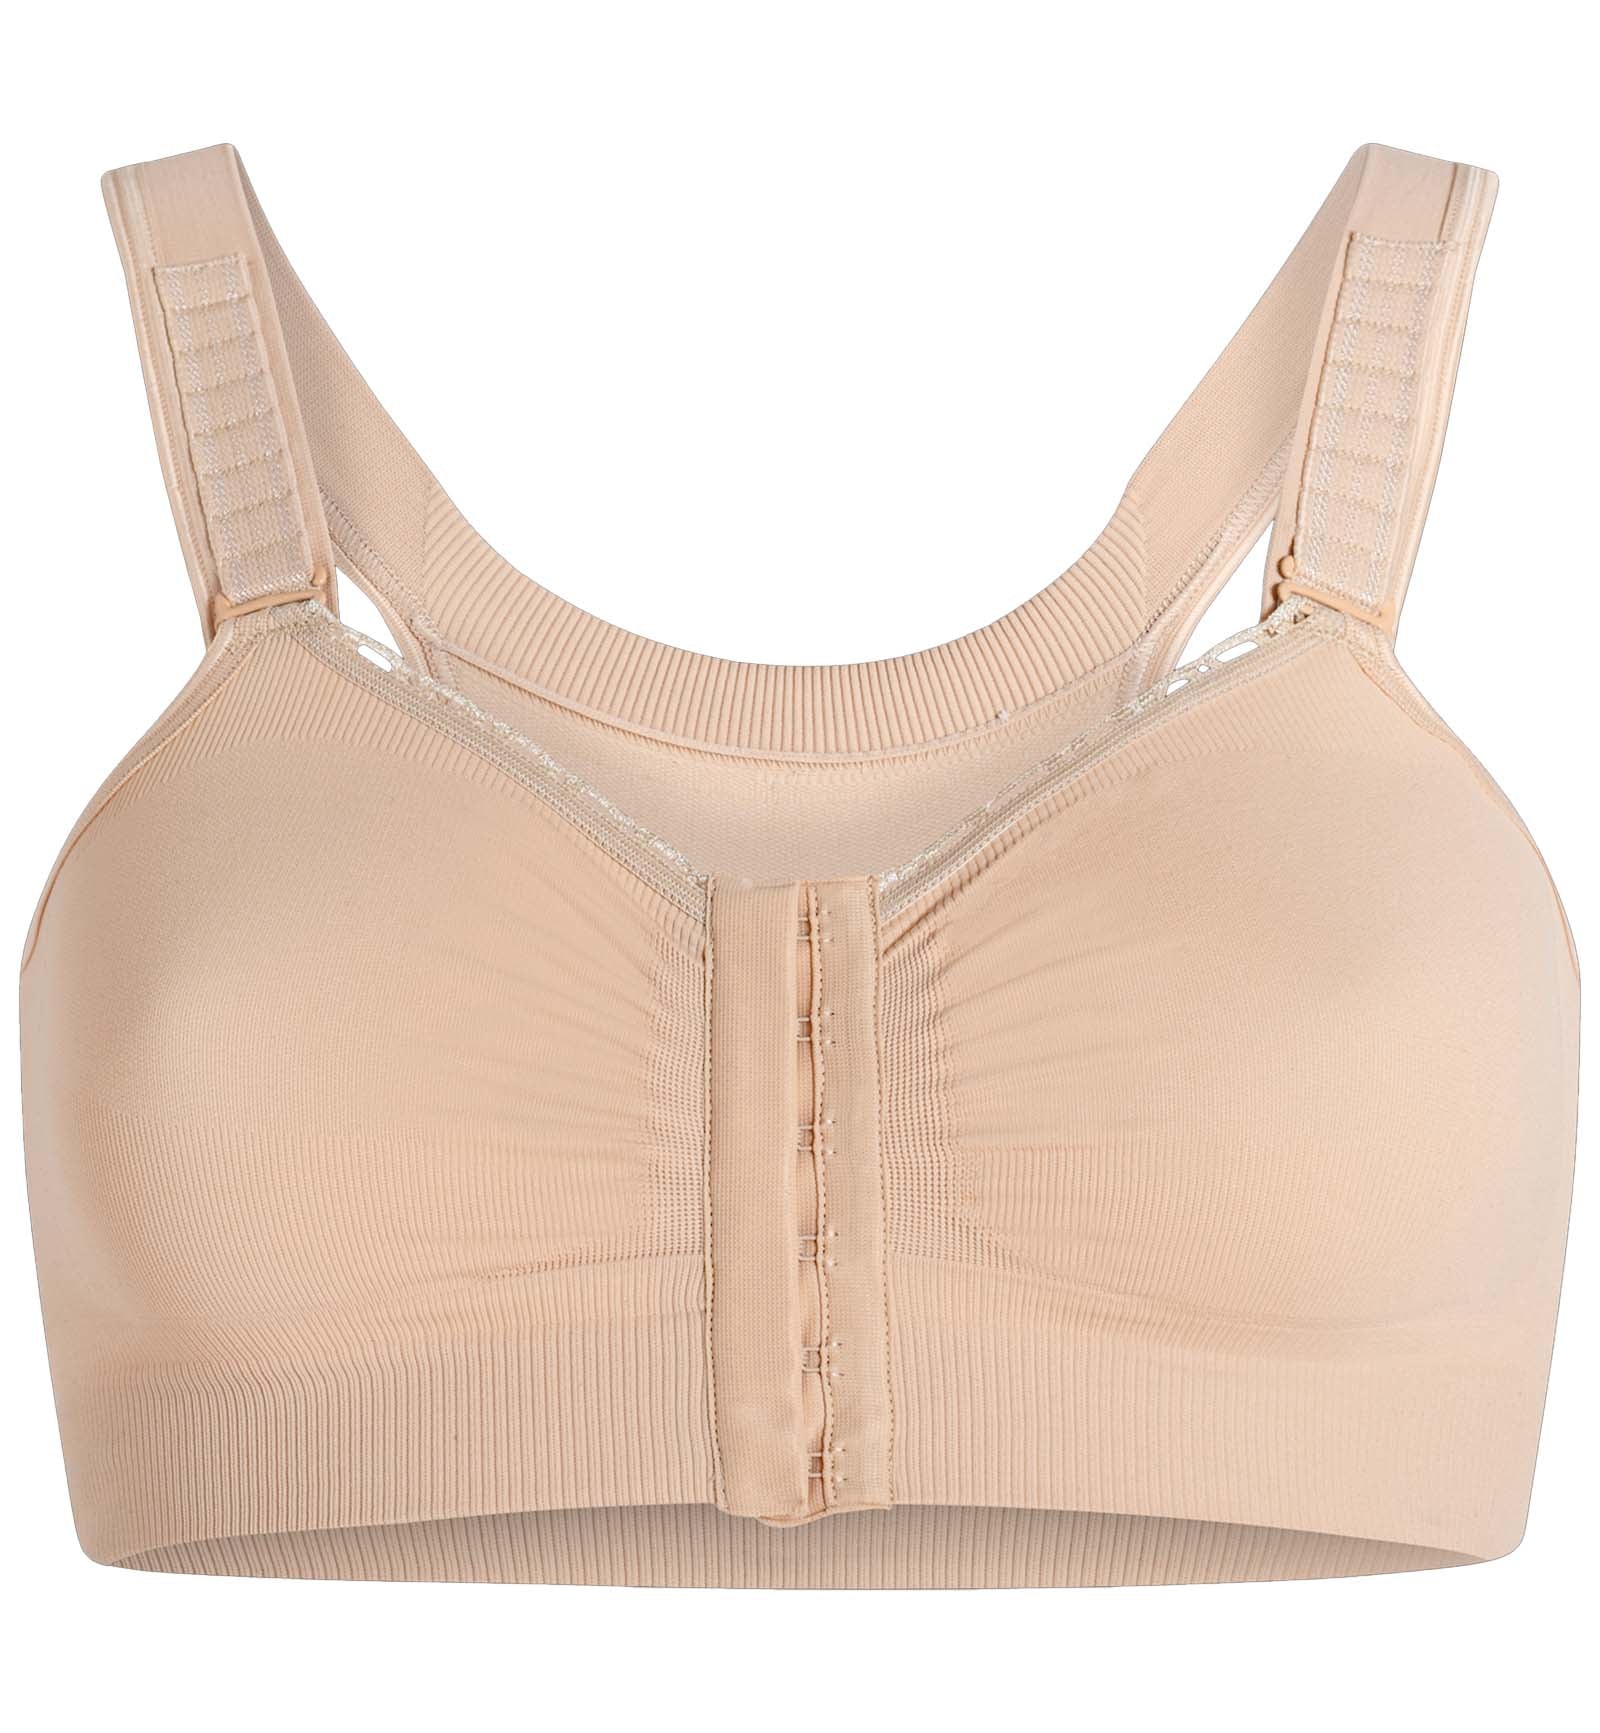 Carefix Ava Seamless Front Close Post-Op Surgical Bra #3444 : Buy Online  at Best Price in KSA - Souq is now : Fashion